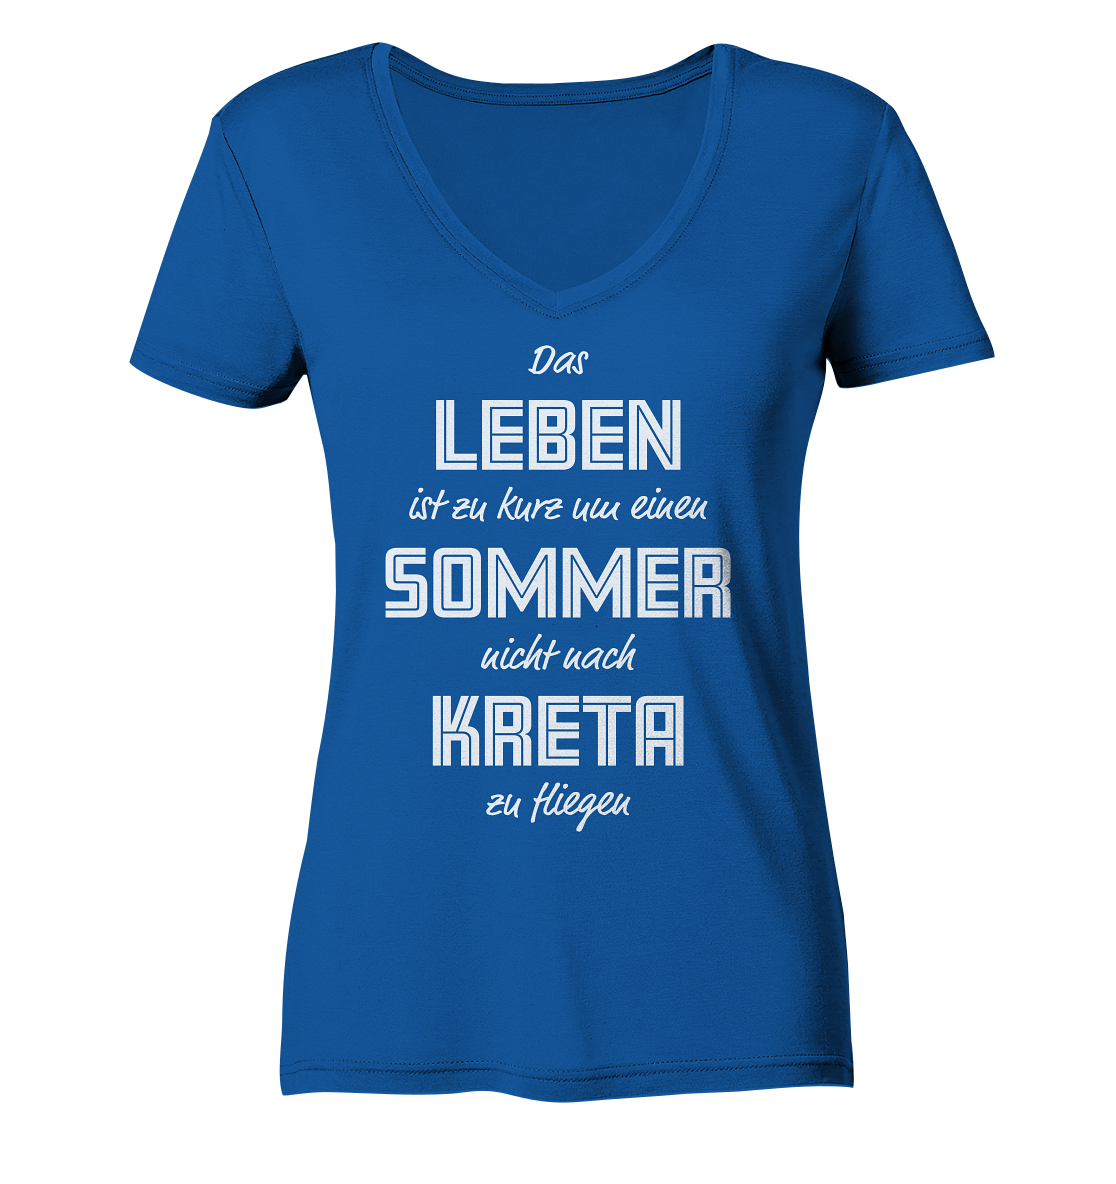 Life is too short not to fly to Crete for a summer - Ladies Organic V-Neck Shirt